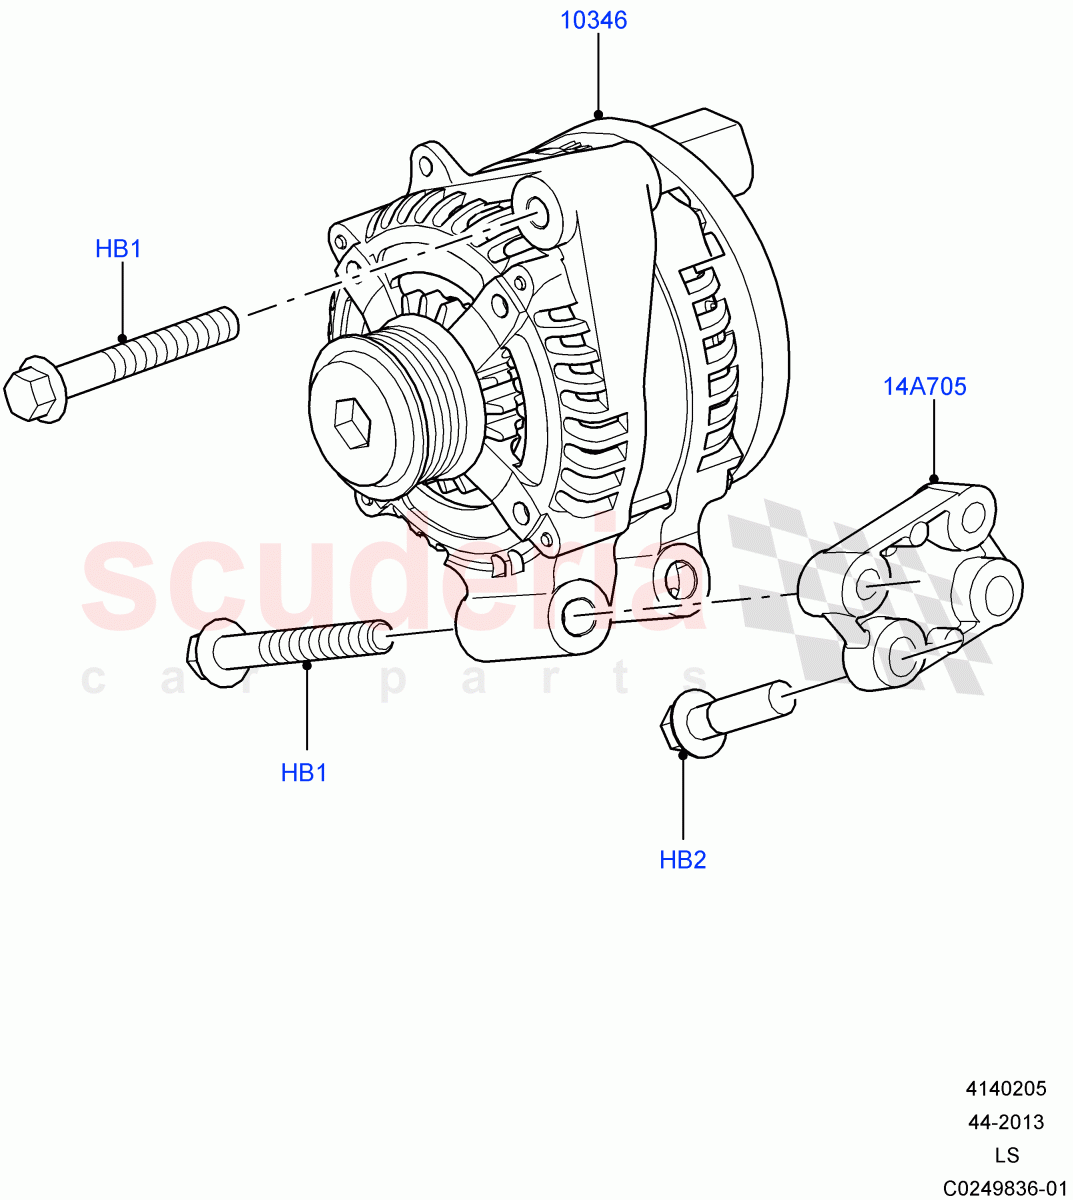 Alternator And Mountings(3.0L DOHC GDI SC V6 PETROL)((V)FROMEA000001) of Land Rover Land Rover Discovery 4 (2010-2016) [5.0 OHC SGDI NA V8 Petrol]